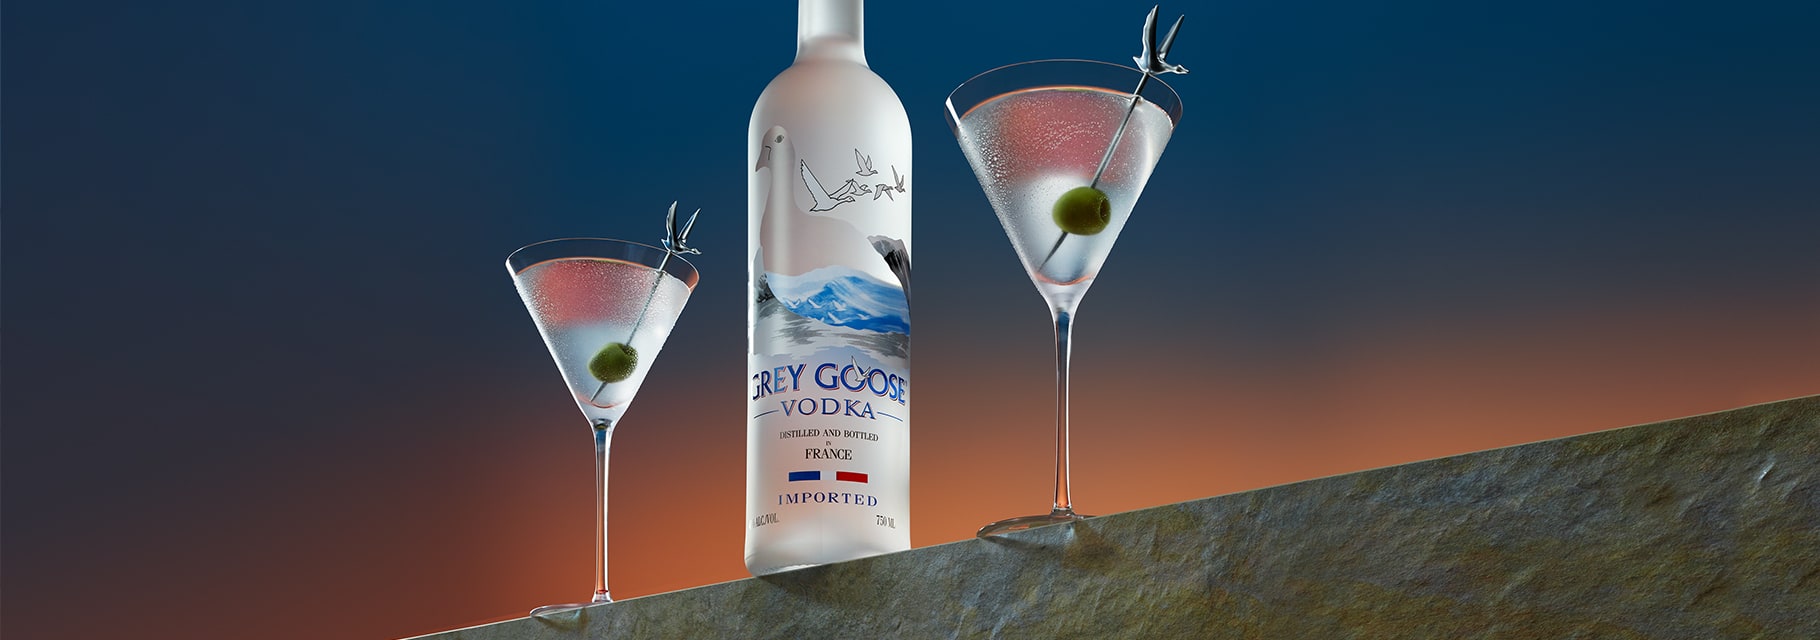 GREY GOOSE® Guide: How to Choose the Best Vodka for Cocktails